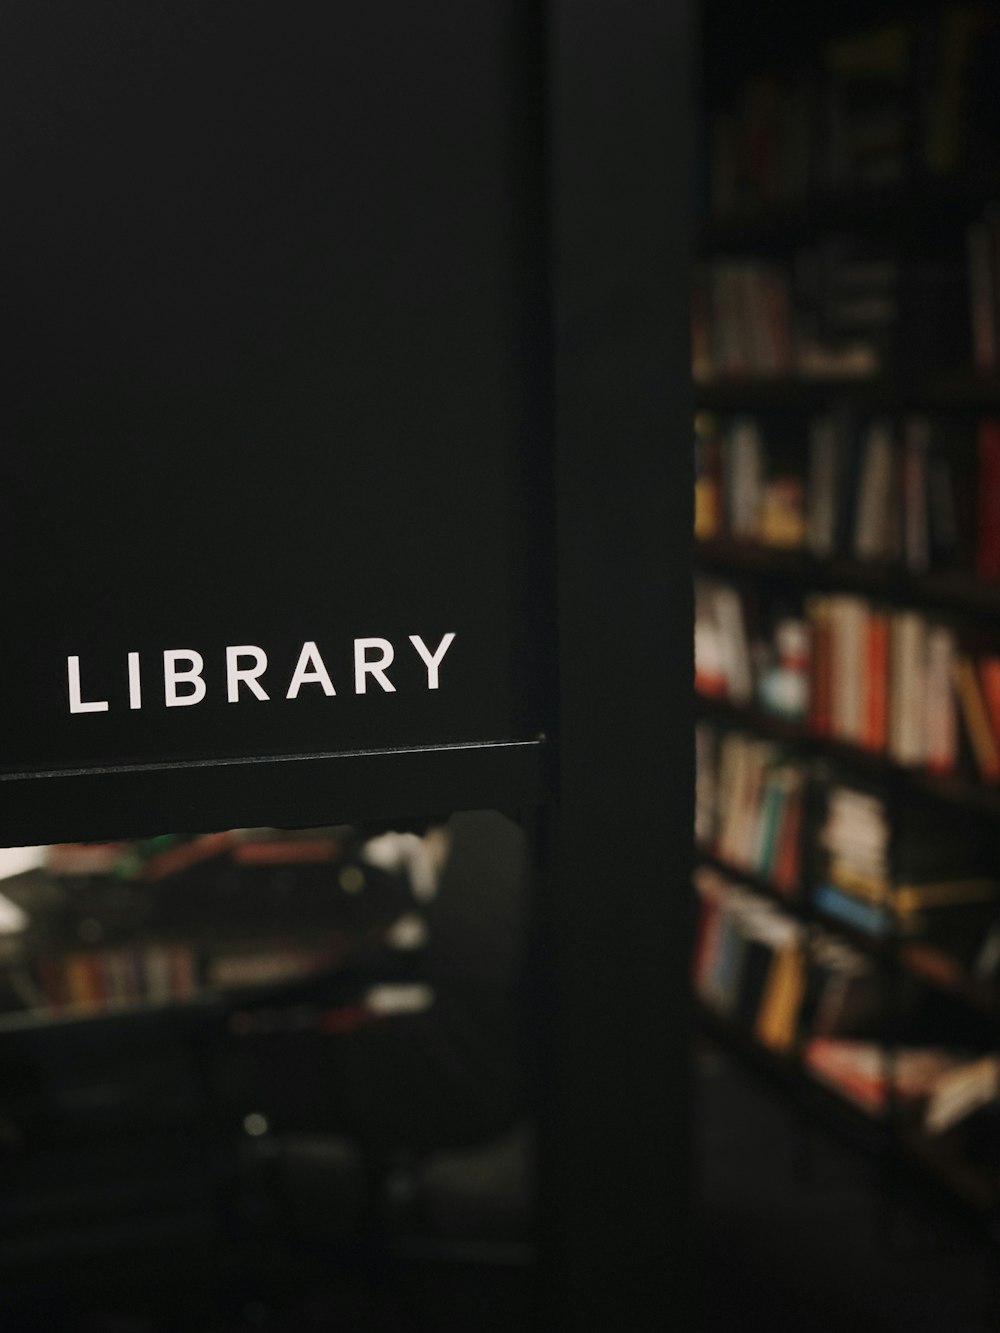 Library wooden sign